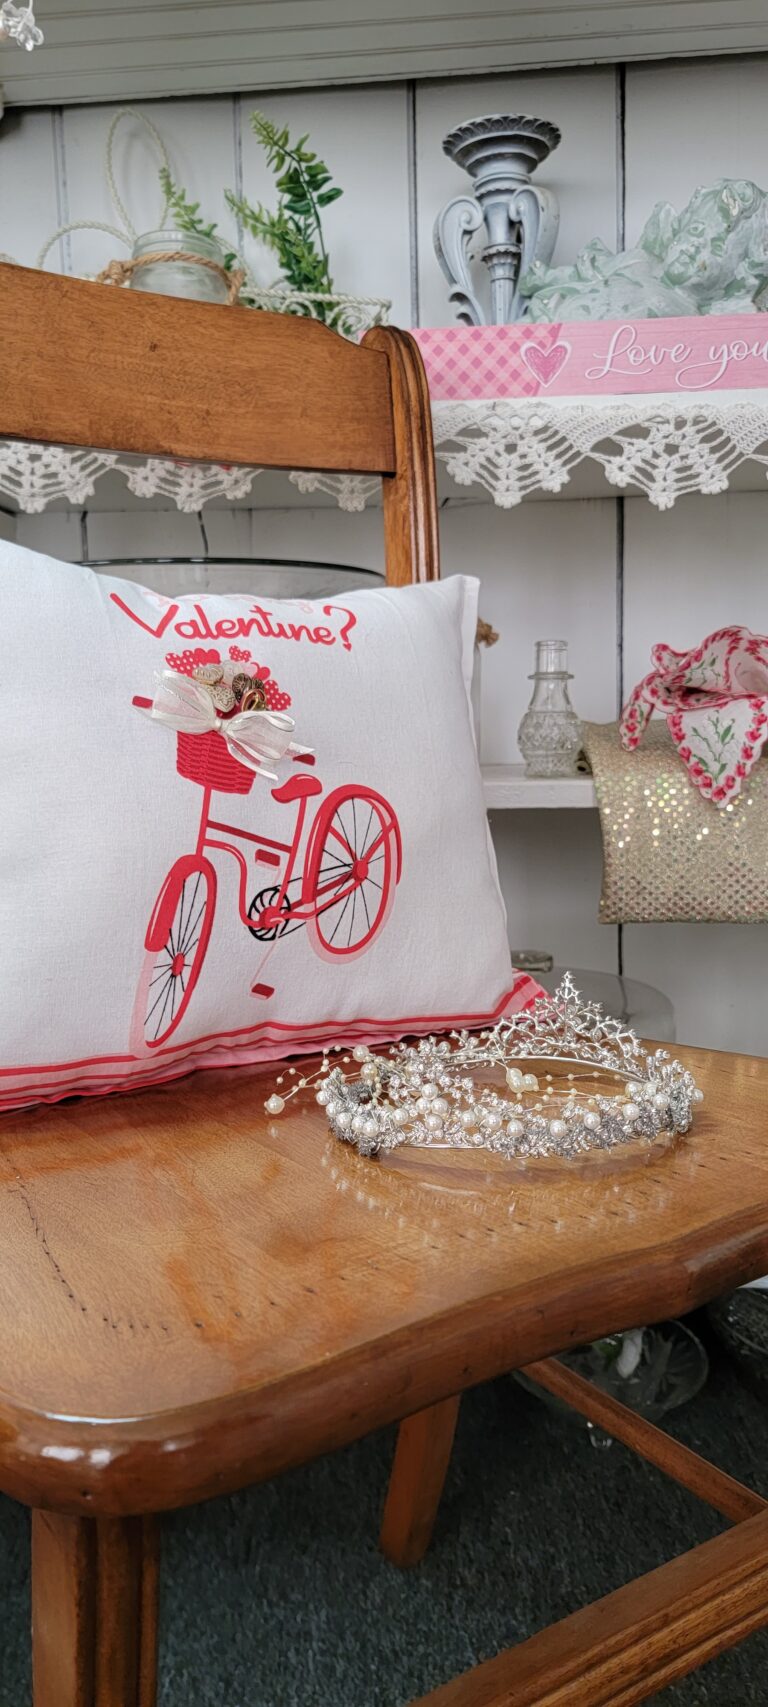 How to Make a Valentine Pillow from a Tea Towel